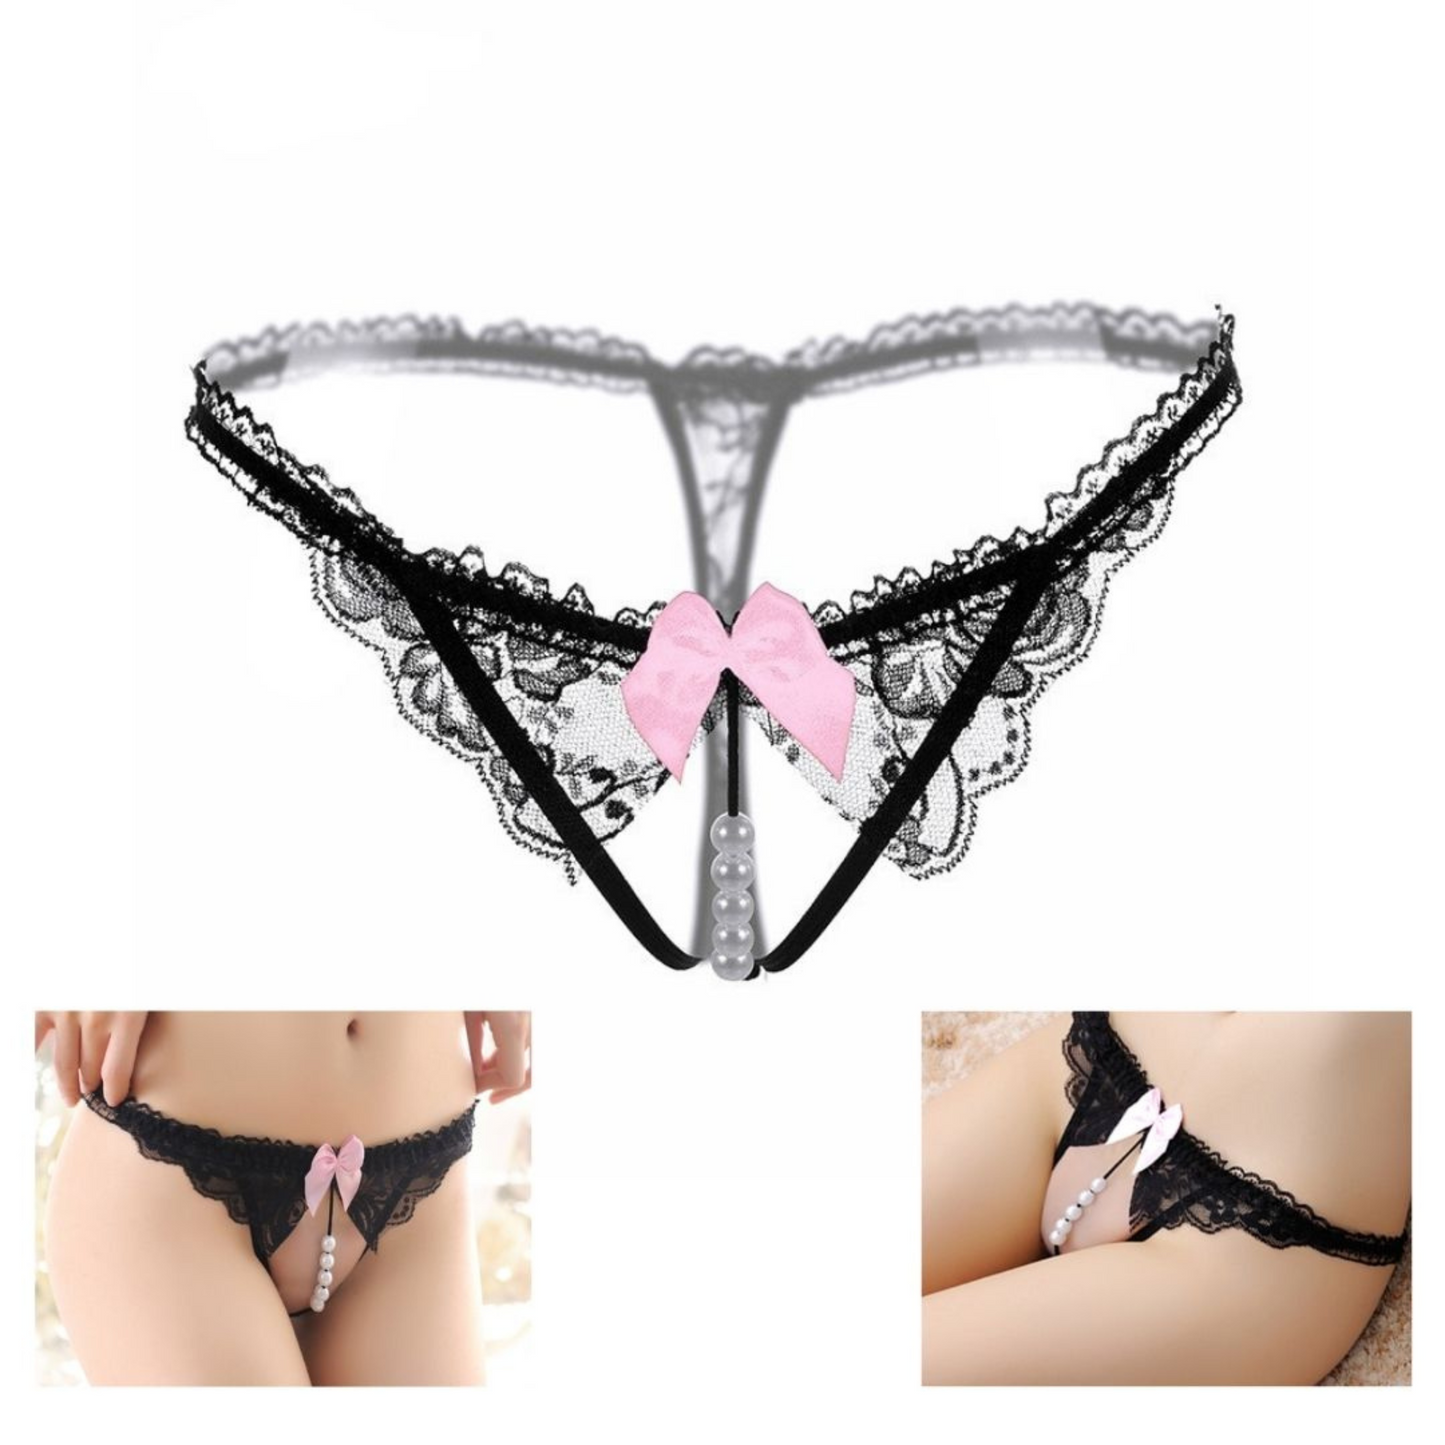 Lace Crotchless Thong with Stimulation Beads